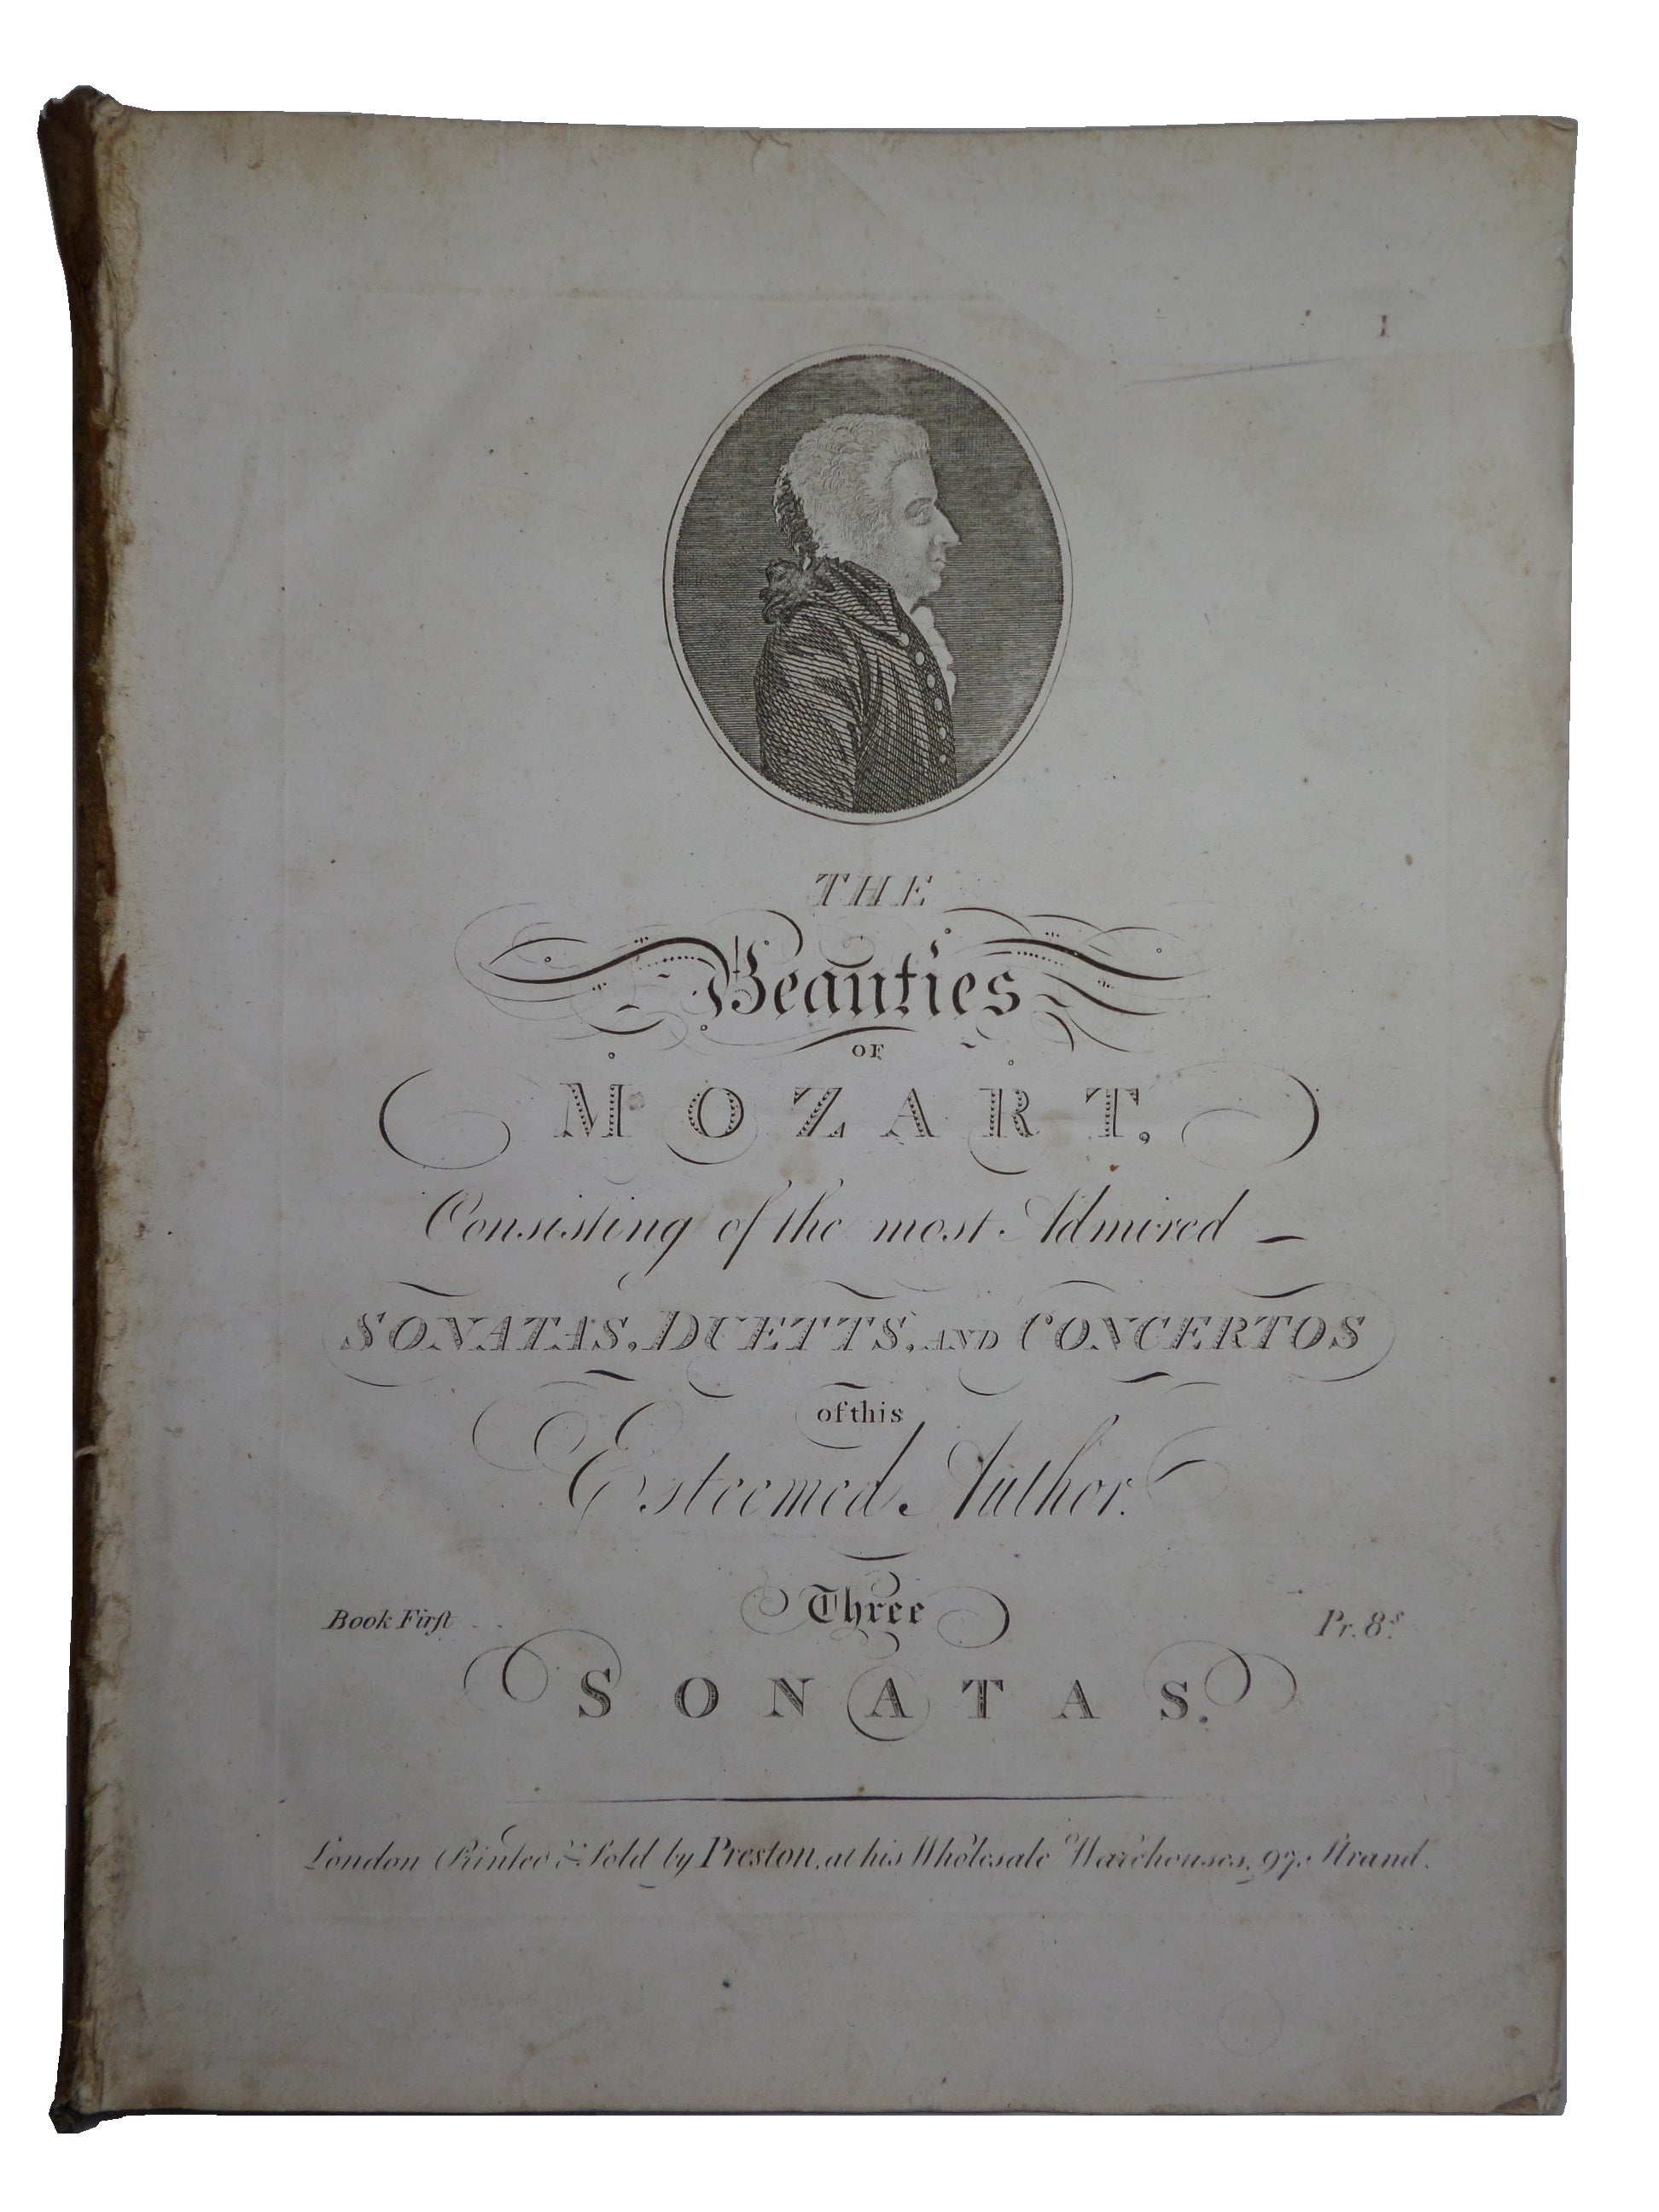 BEAUTIES OF MOZART CONSISTING OF THE MOST ADMIRED SONATAS, DUETTS & CONCERTOS BOOKS ONE TO SIX, CIRCA 1780-1810, RARE SHEET MUSIC